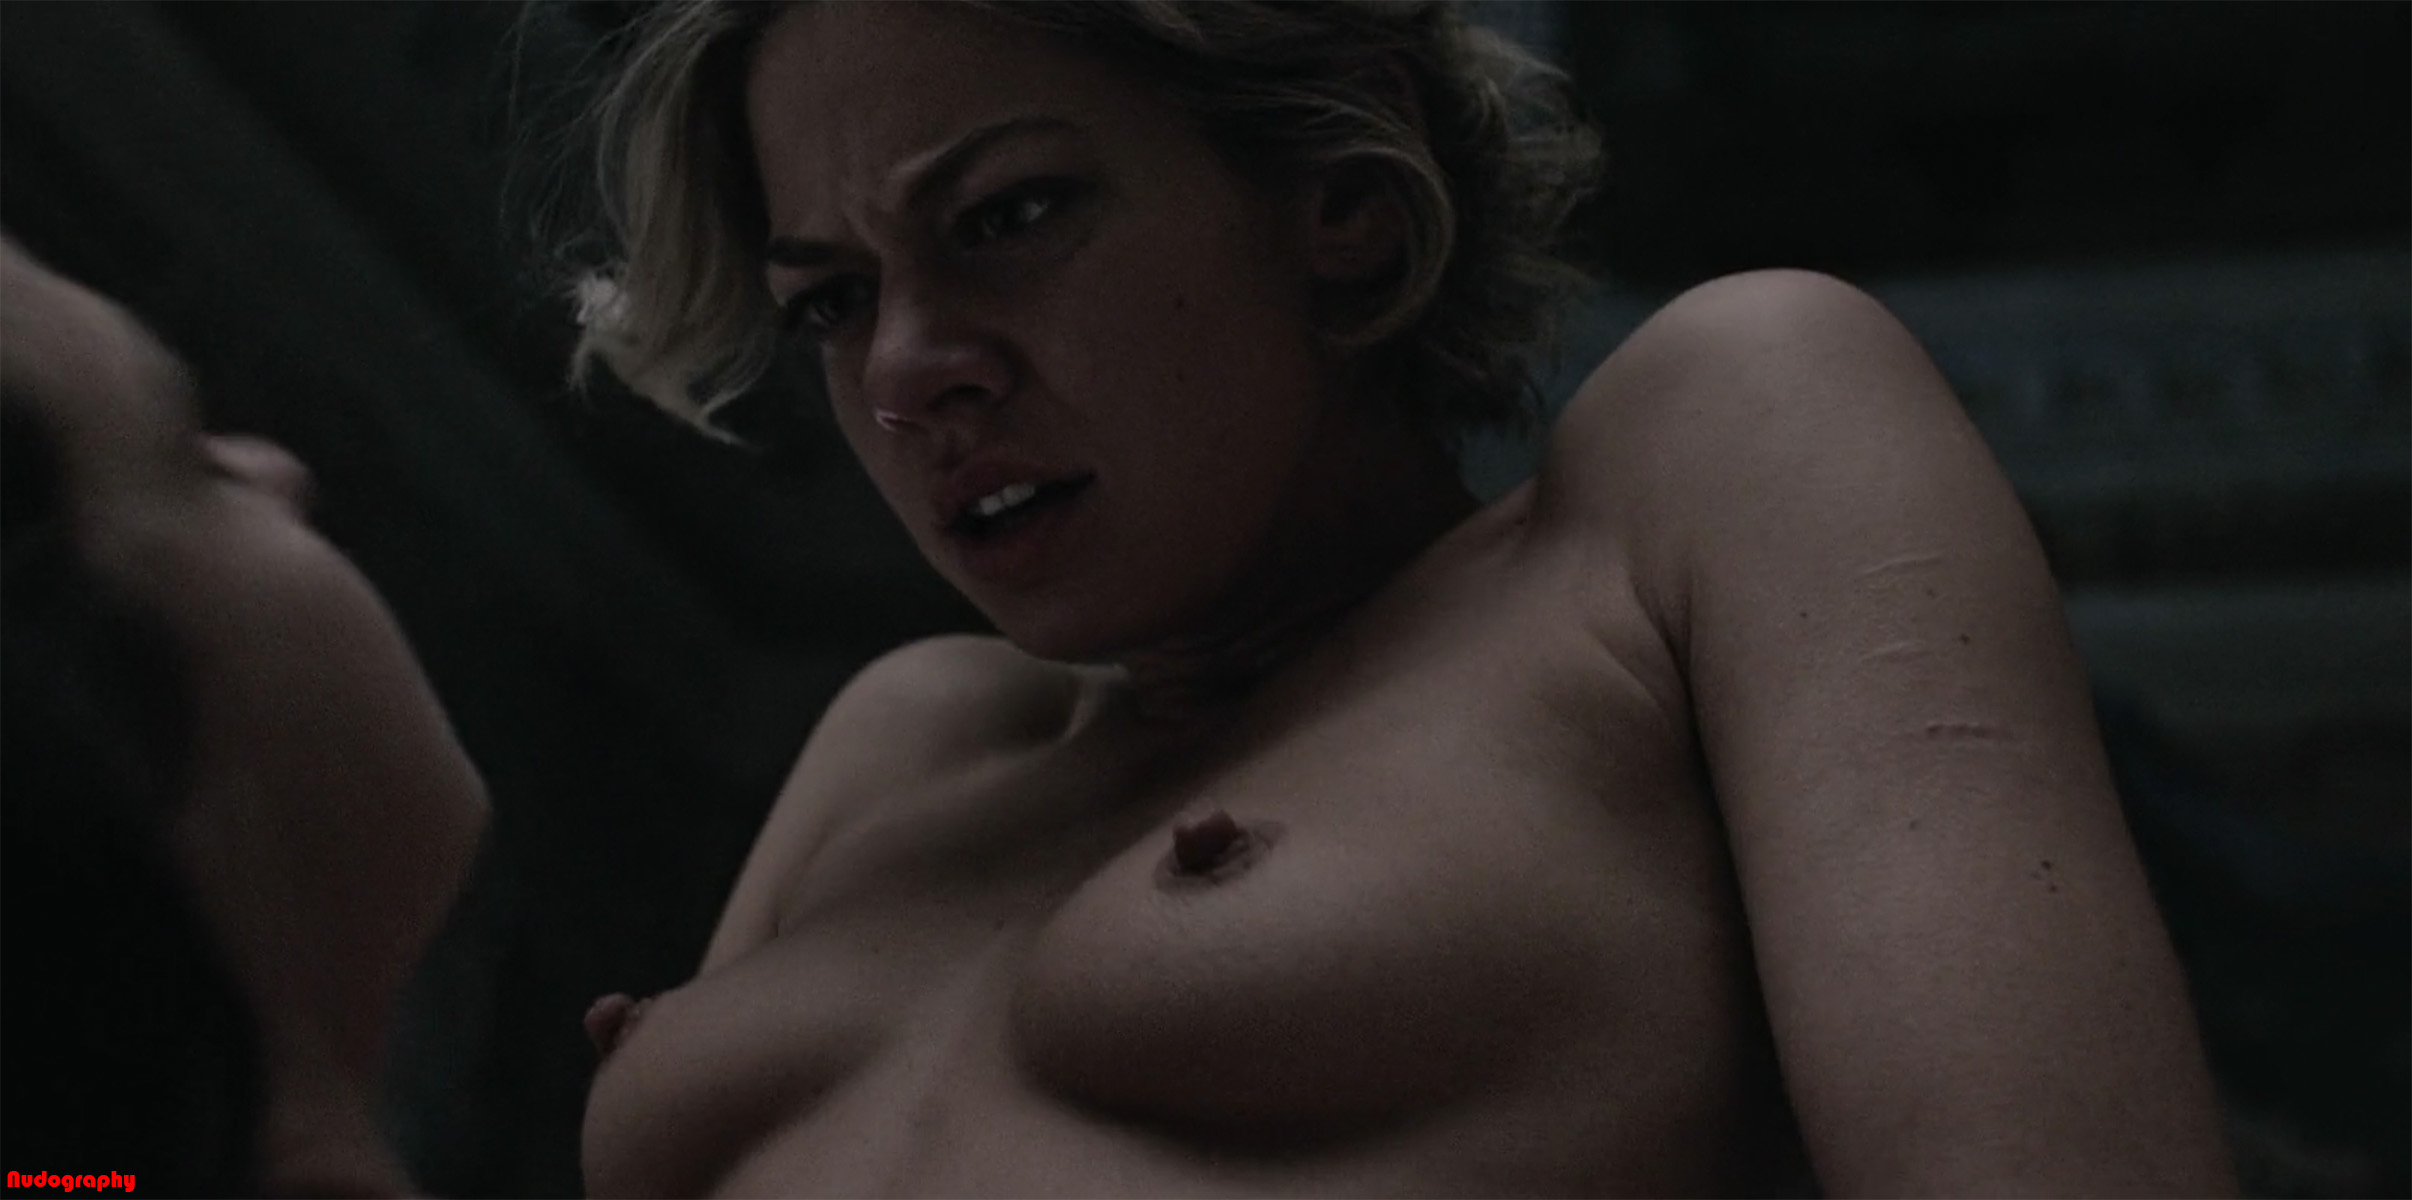 bill randall recommends Analeigh Tipton Nudography